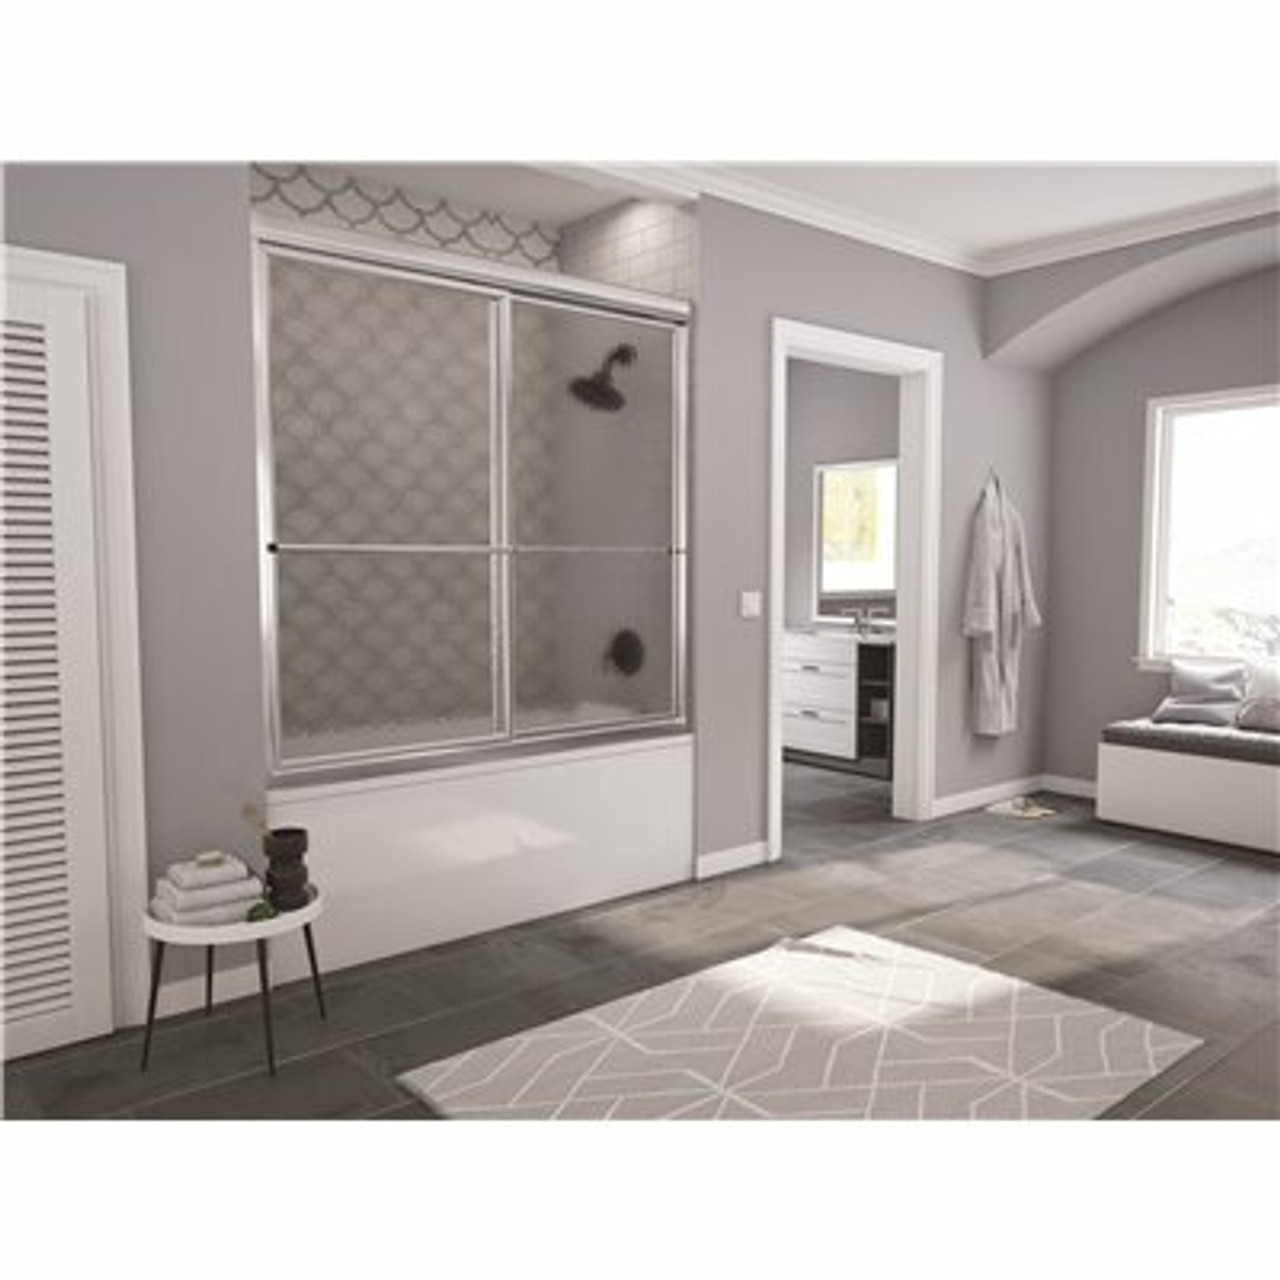 Newport 54 In. To 55.625 In. X 55 In. Framed Sliding Tub Door With Towel Bar In Chrome With Aquatex Glass